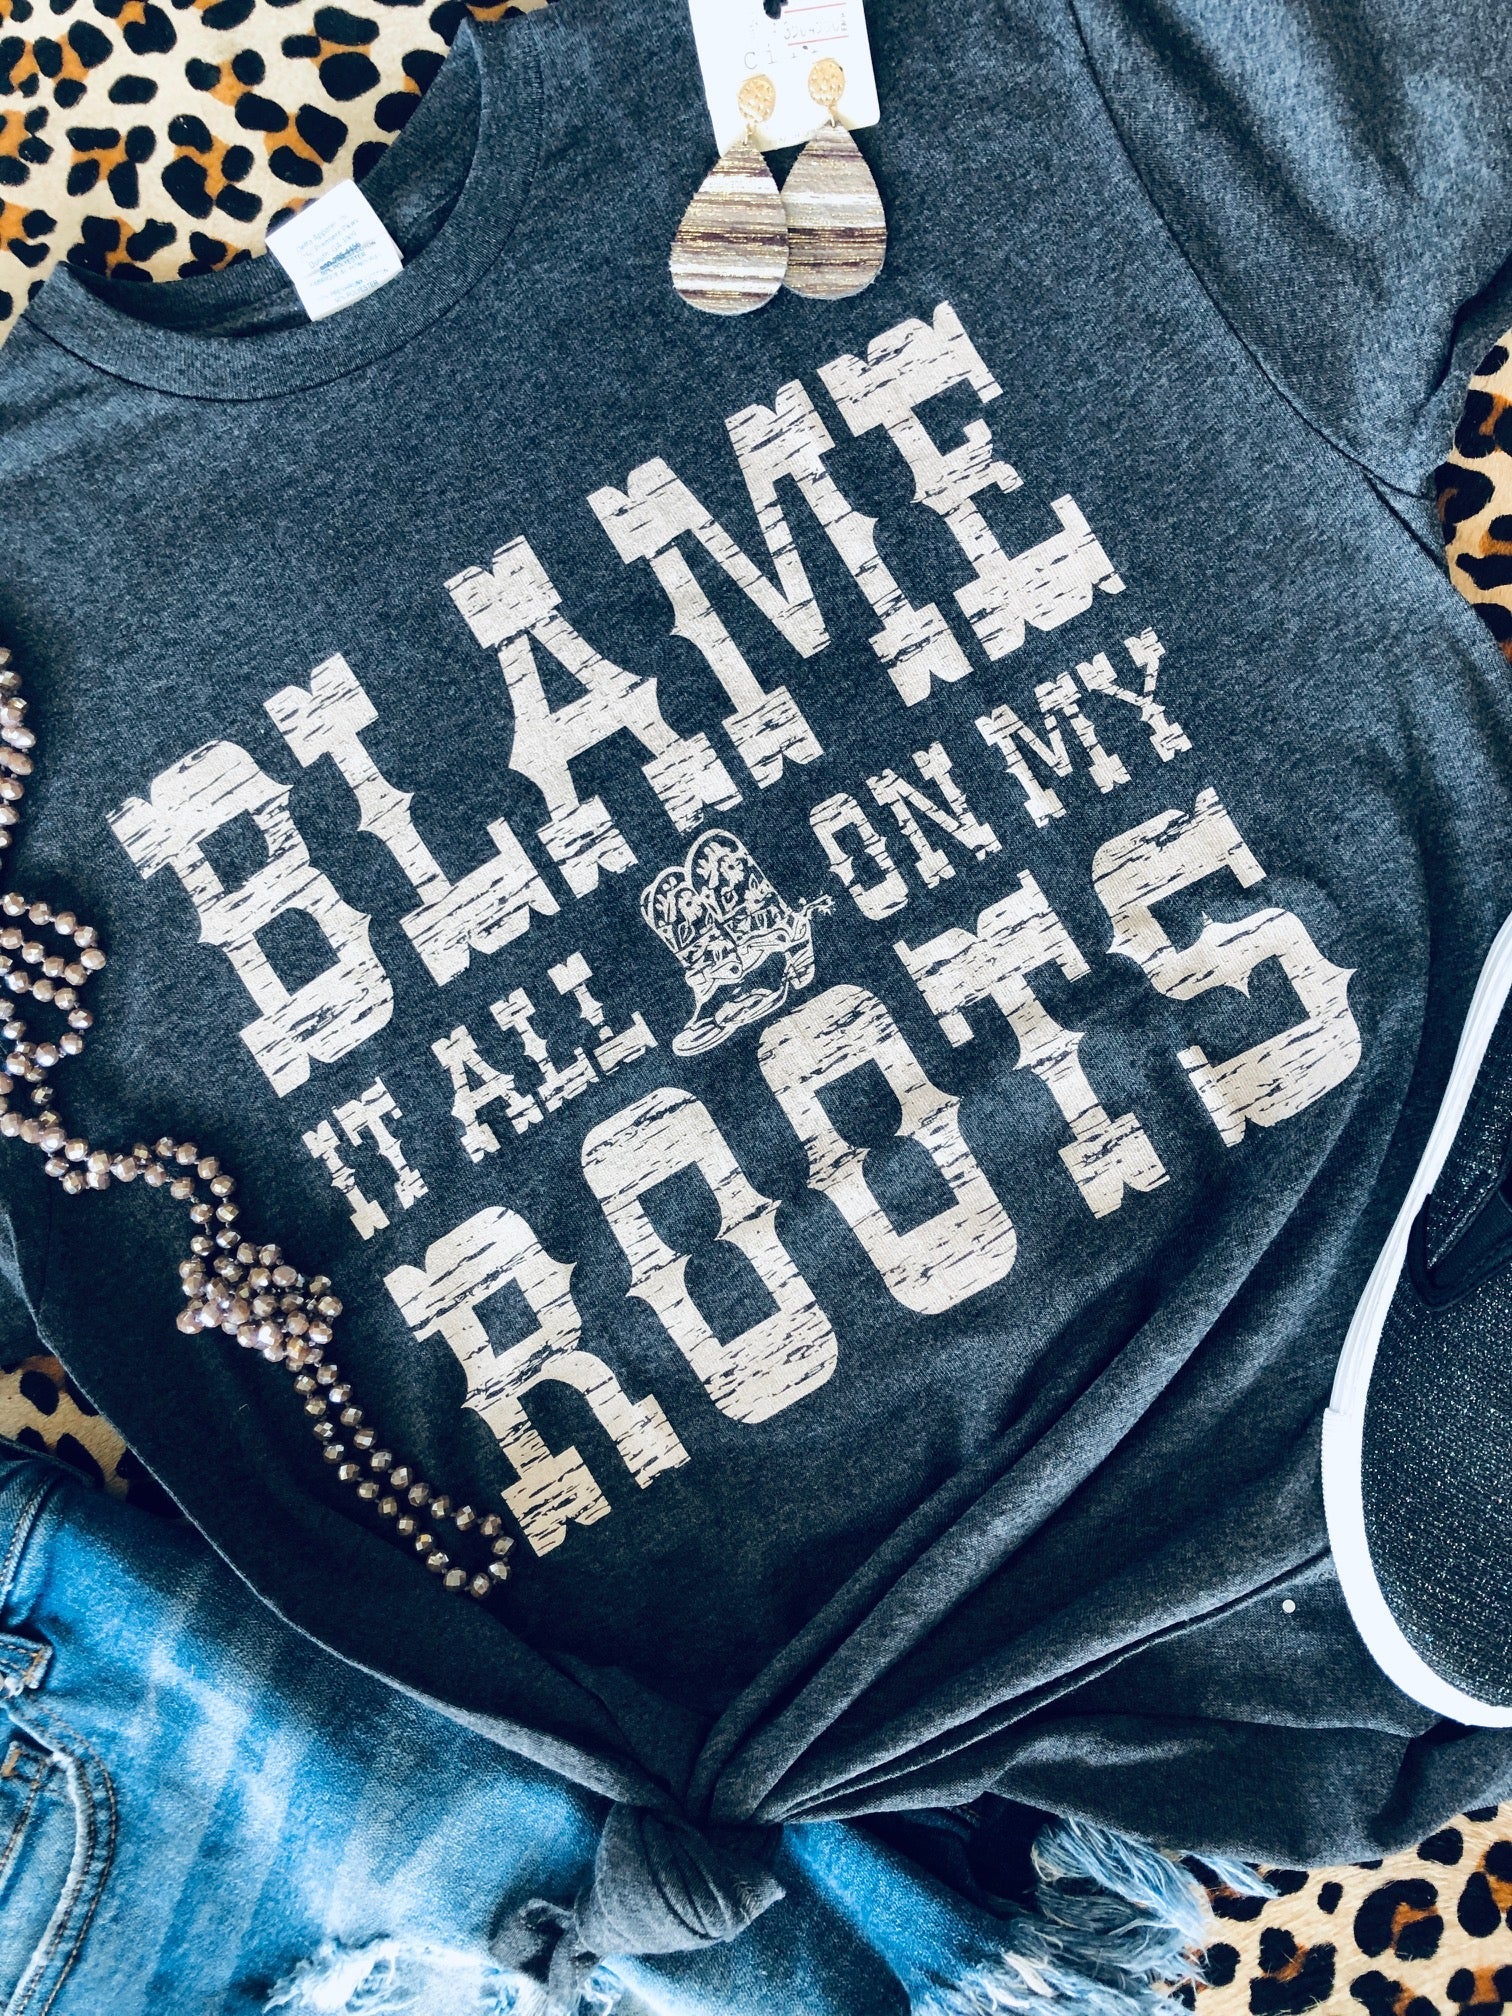 Blame it all on my roots tee